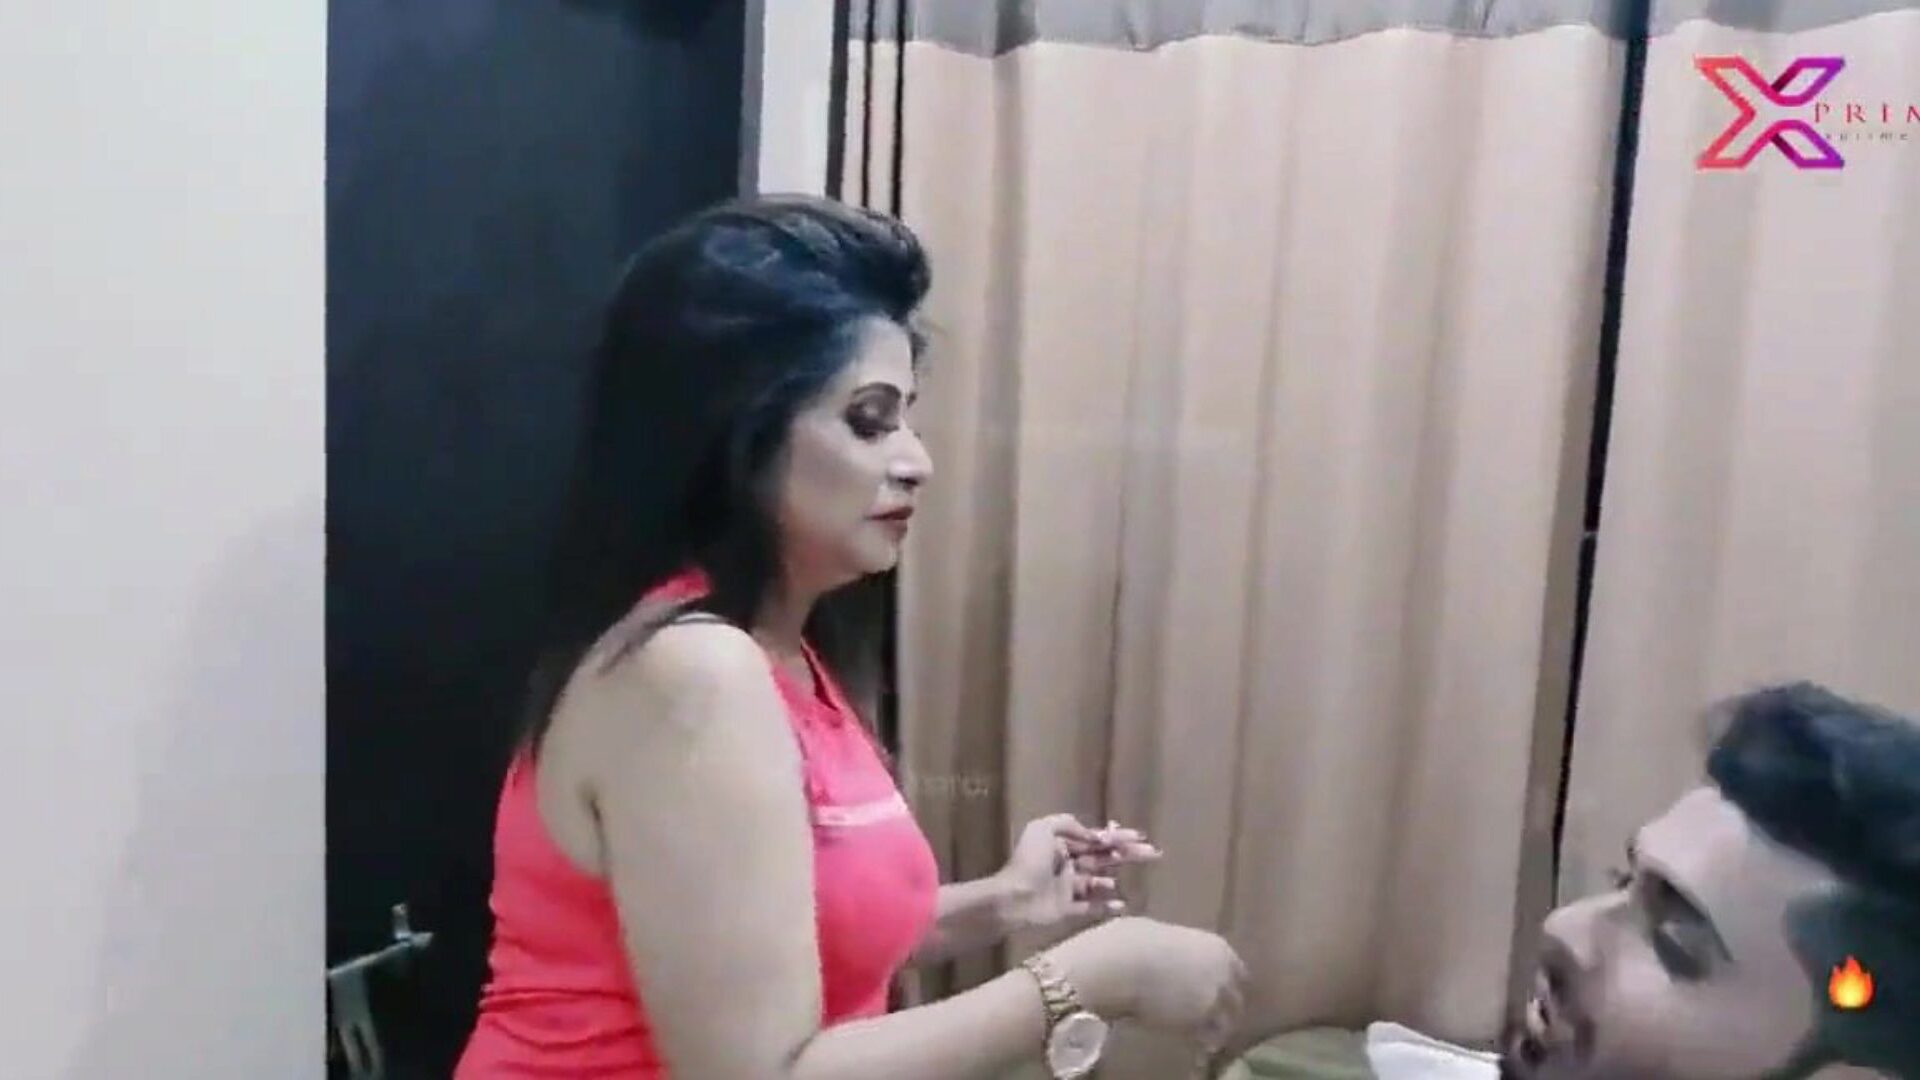 Escort Boy Service: Free Indian HD Porn Video fb - xHamster Watch Escort Boy Service tube romp movie for free on xHamster, with the astonishing collection of Indian Xnxx Boy, Sex & Hot Escort HD porno episode scenes